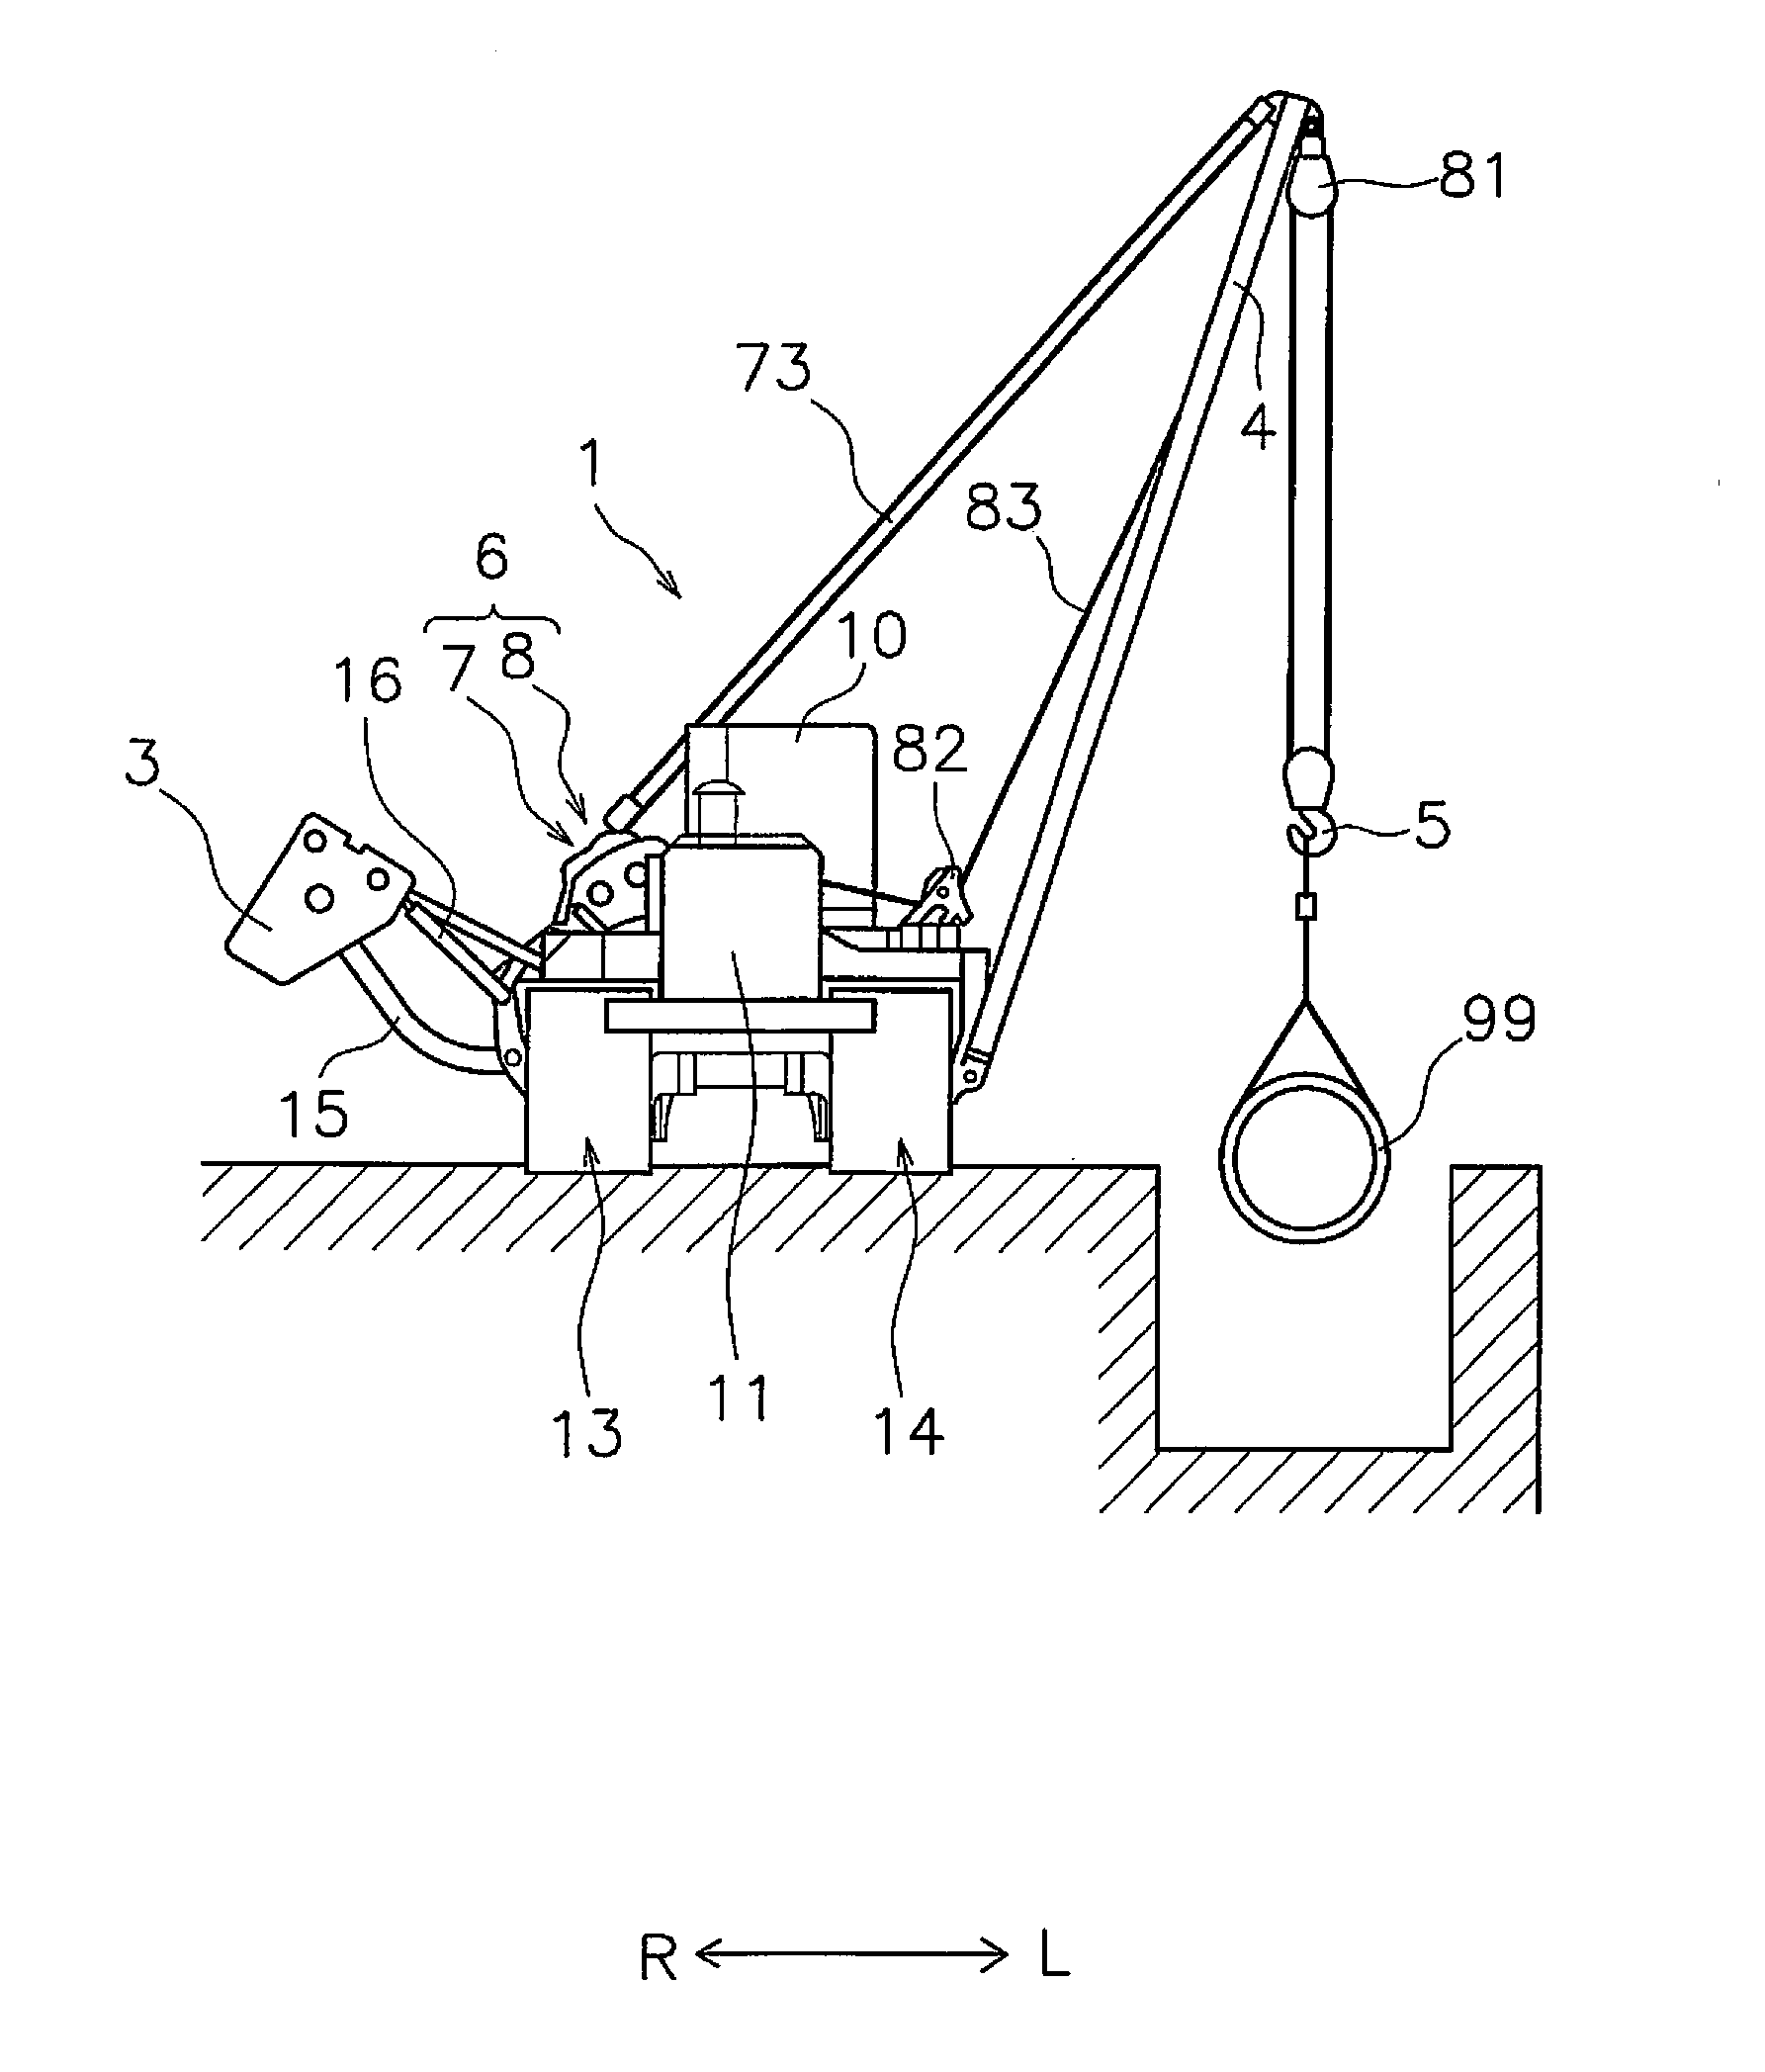 Winch for pipelayer and pipelayer equipped with same